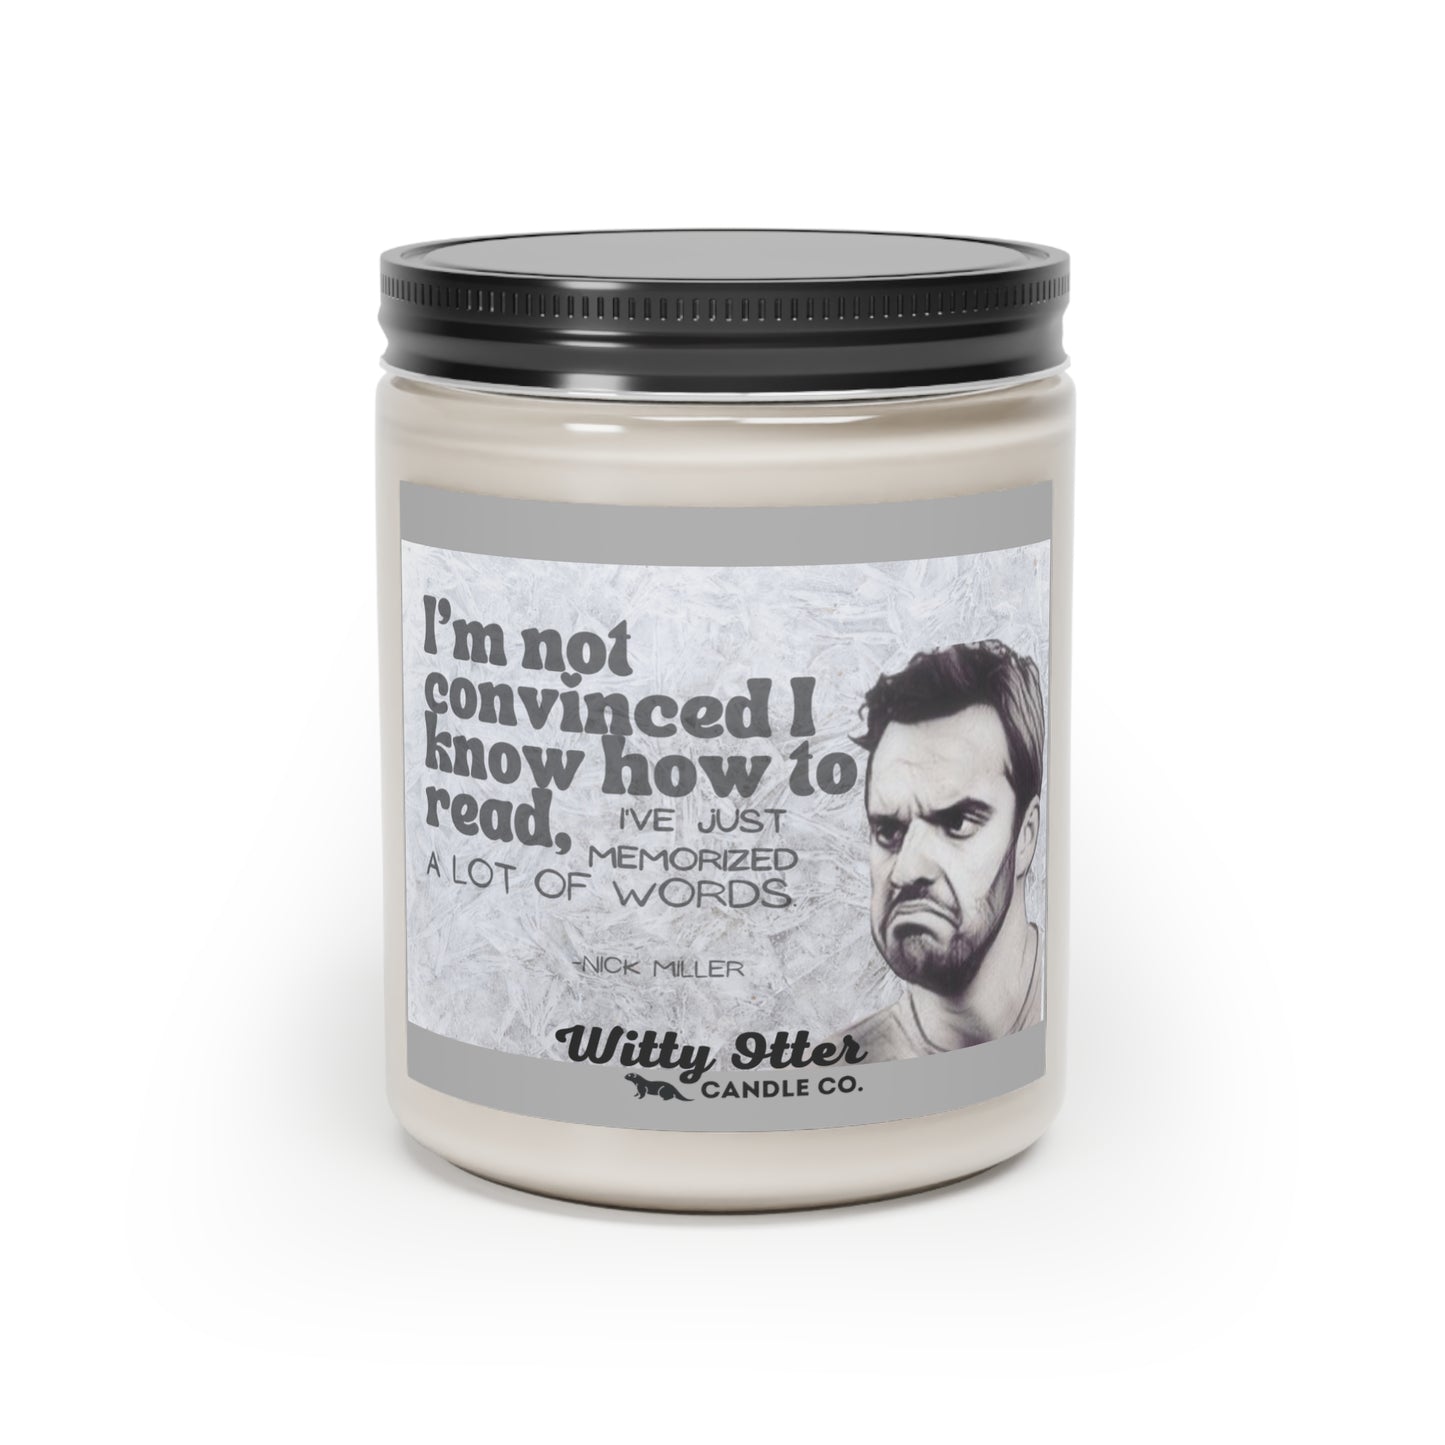 Nick Miller "Reading" quote 9oz soy candle | New Girl show candle